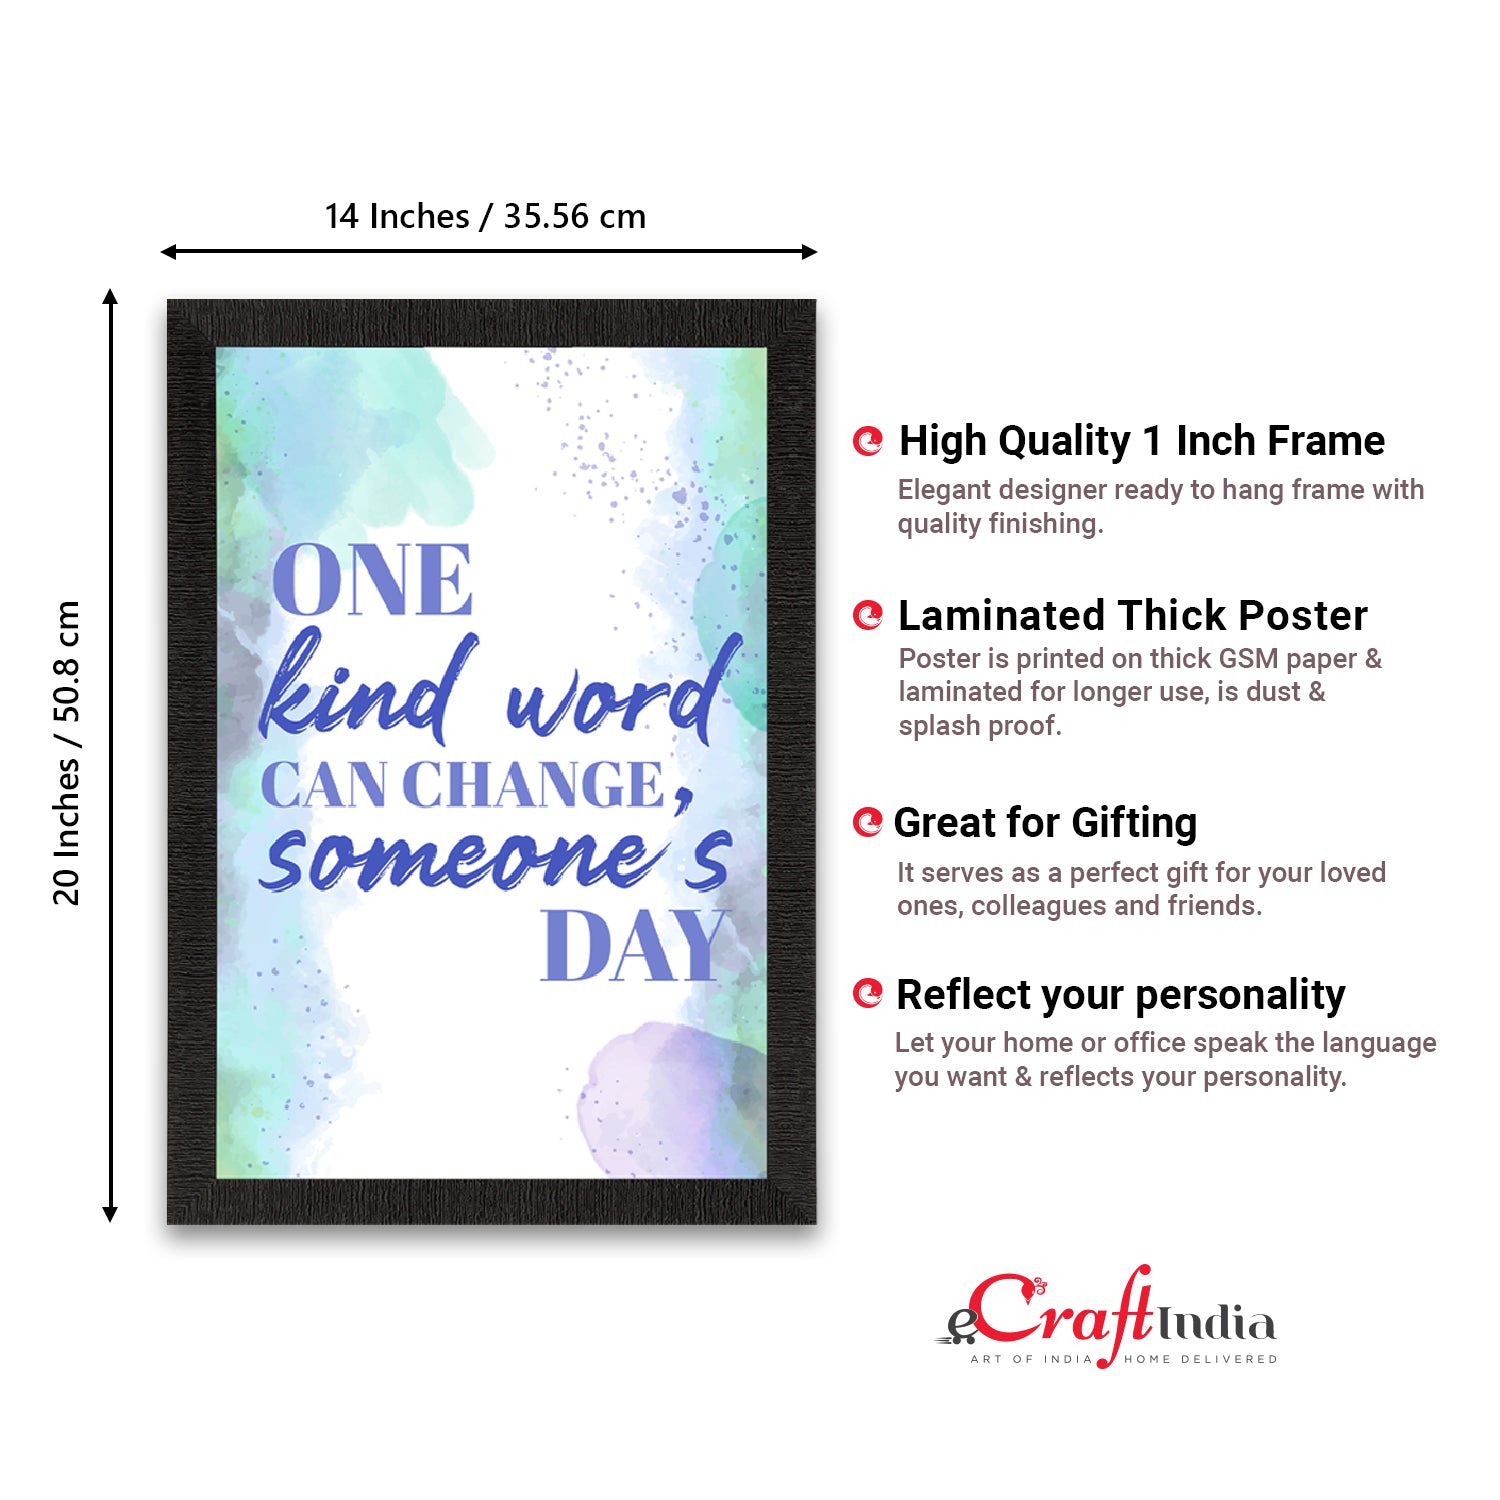 "One kind word can change someone's day" Motivational Quote Satin Matt Texture UV Art Painting 3